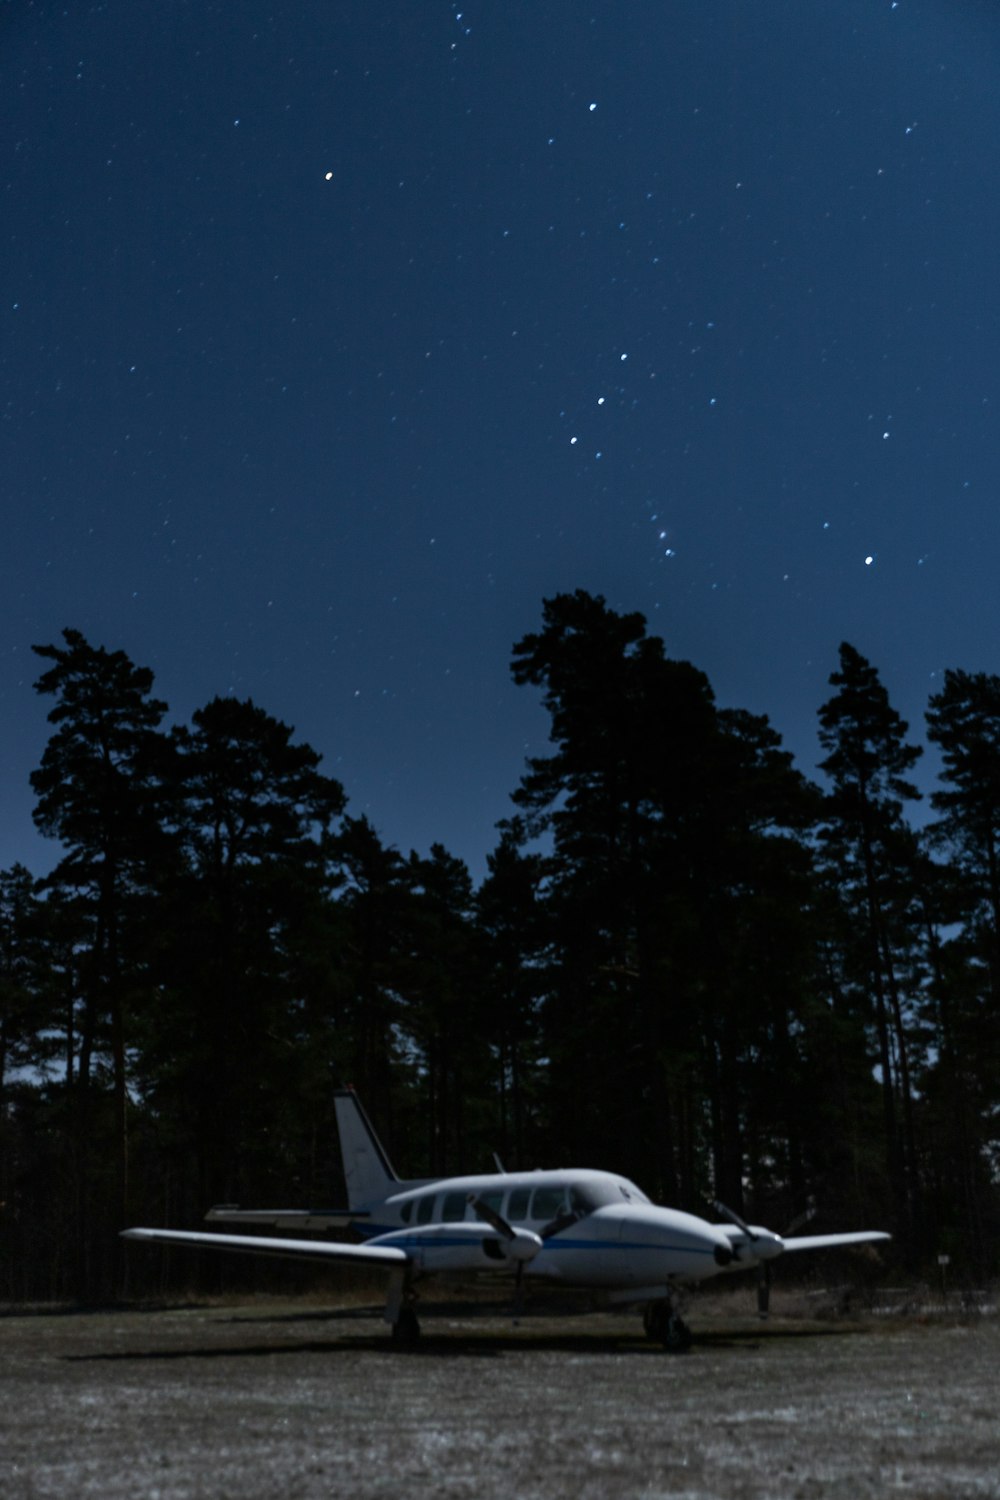 white airplane on the ground during night time